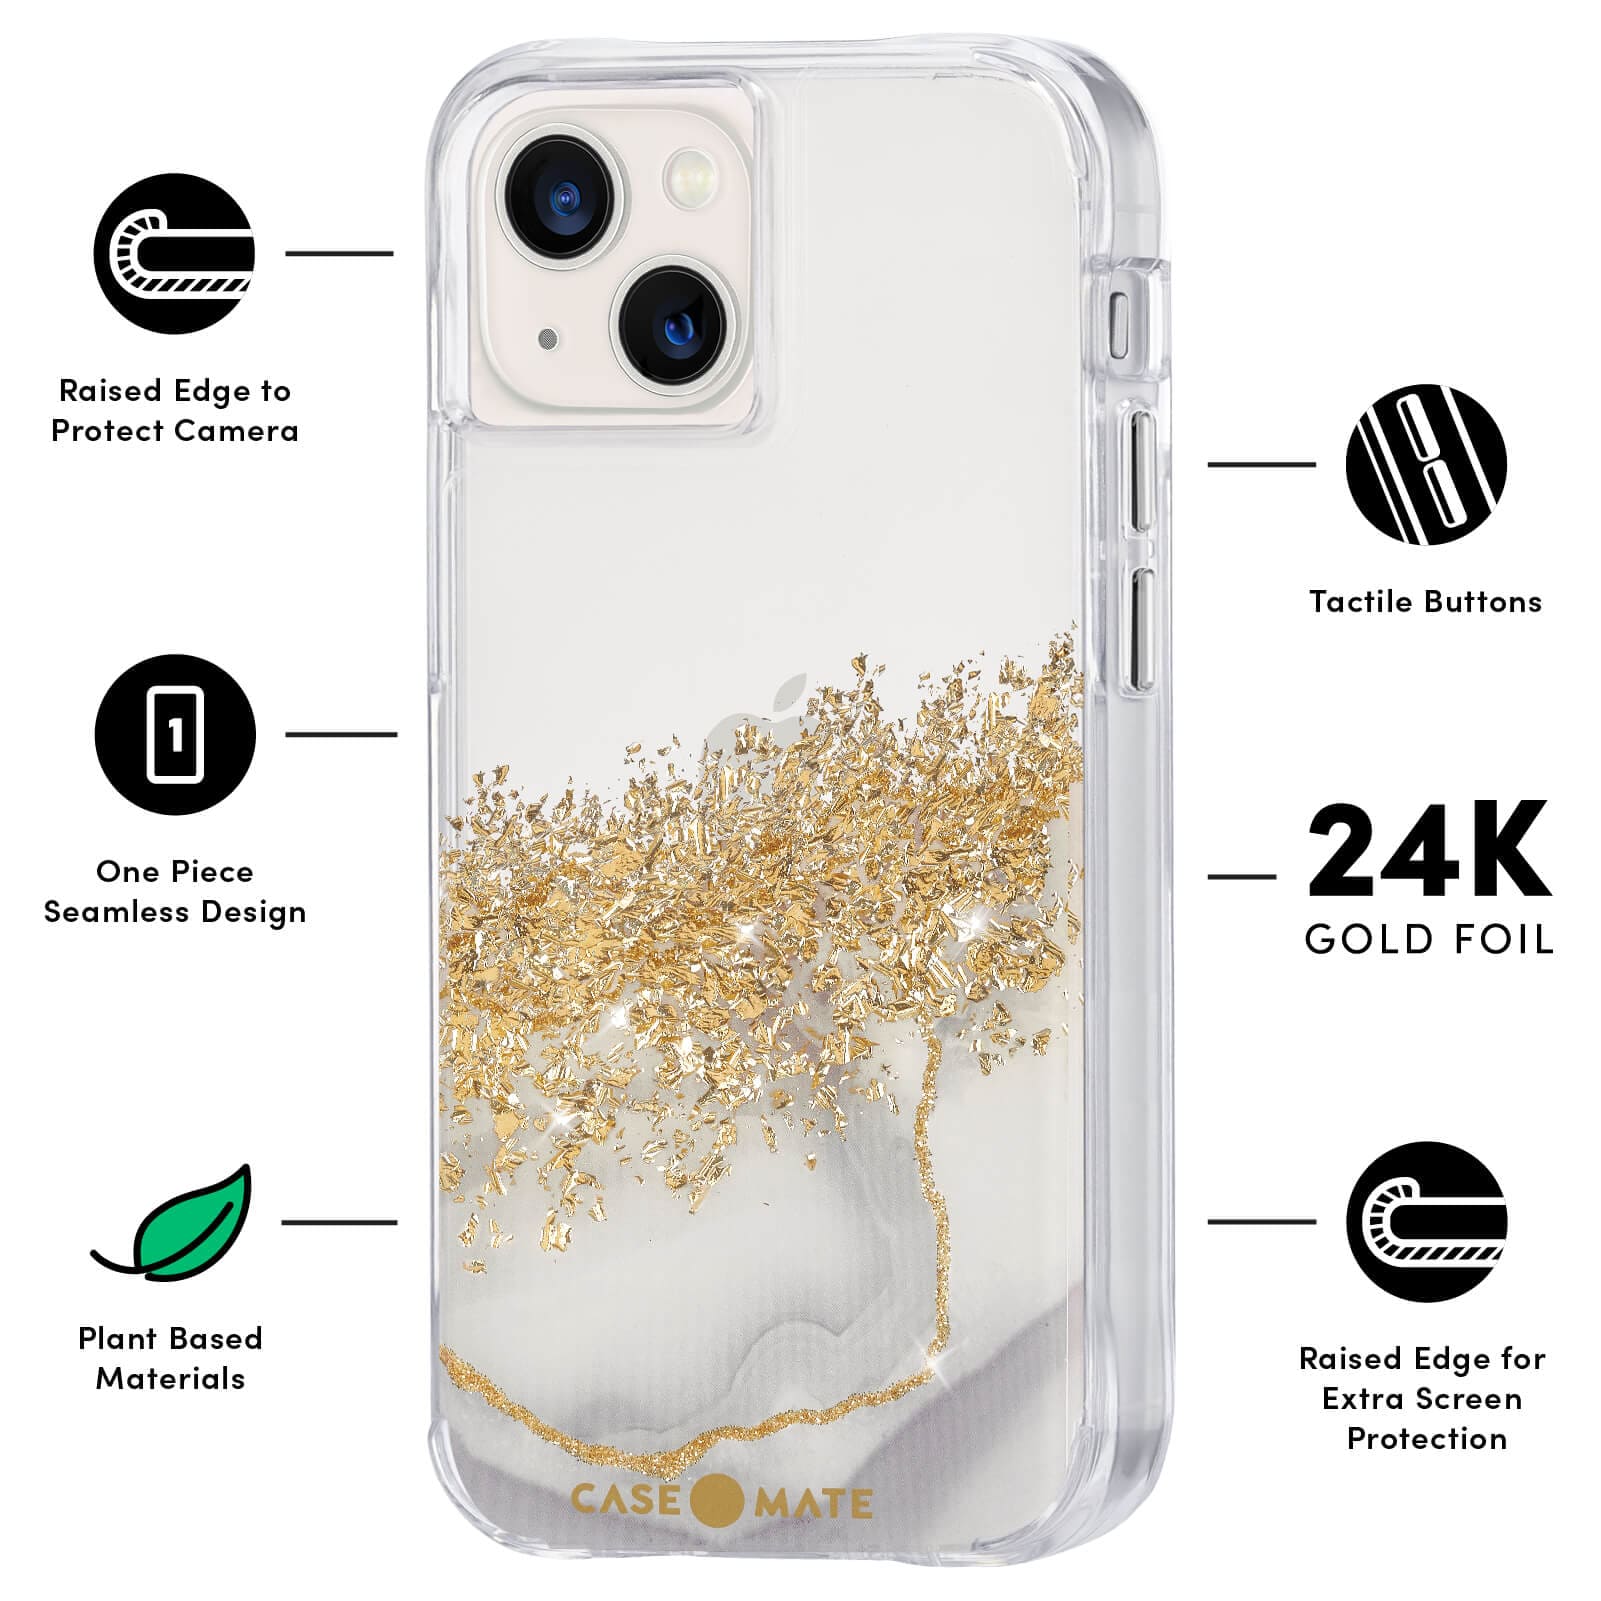 FEATURES: RAISED EDGE TO PROTECT CAMERA, ONE PIECE SEAMLESS DESIGN, PLANT BASED MATERIALS, TACTILE BUTTONS, 24K GOLD FOIL, RAISED EDGE FOR EXTRA SCREEN PROTECTION. COLOR::KARAT MARBLE